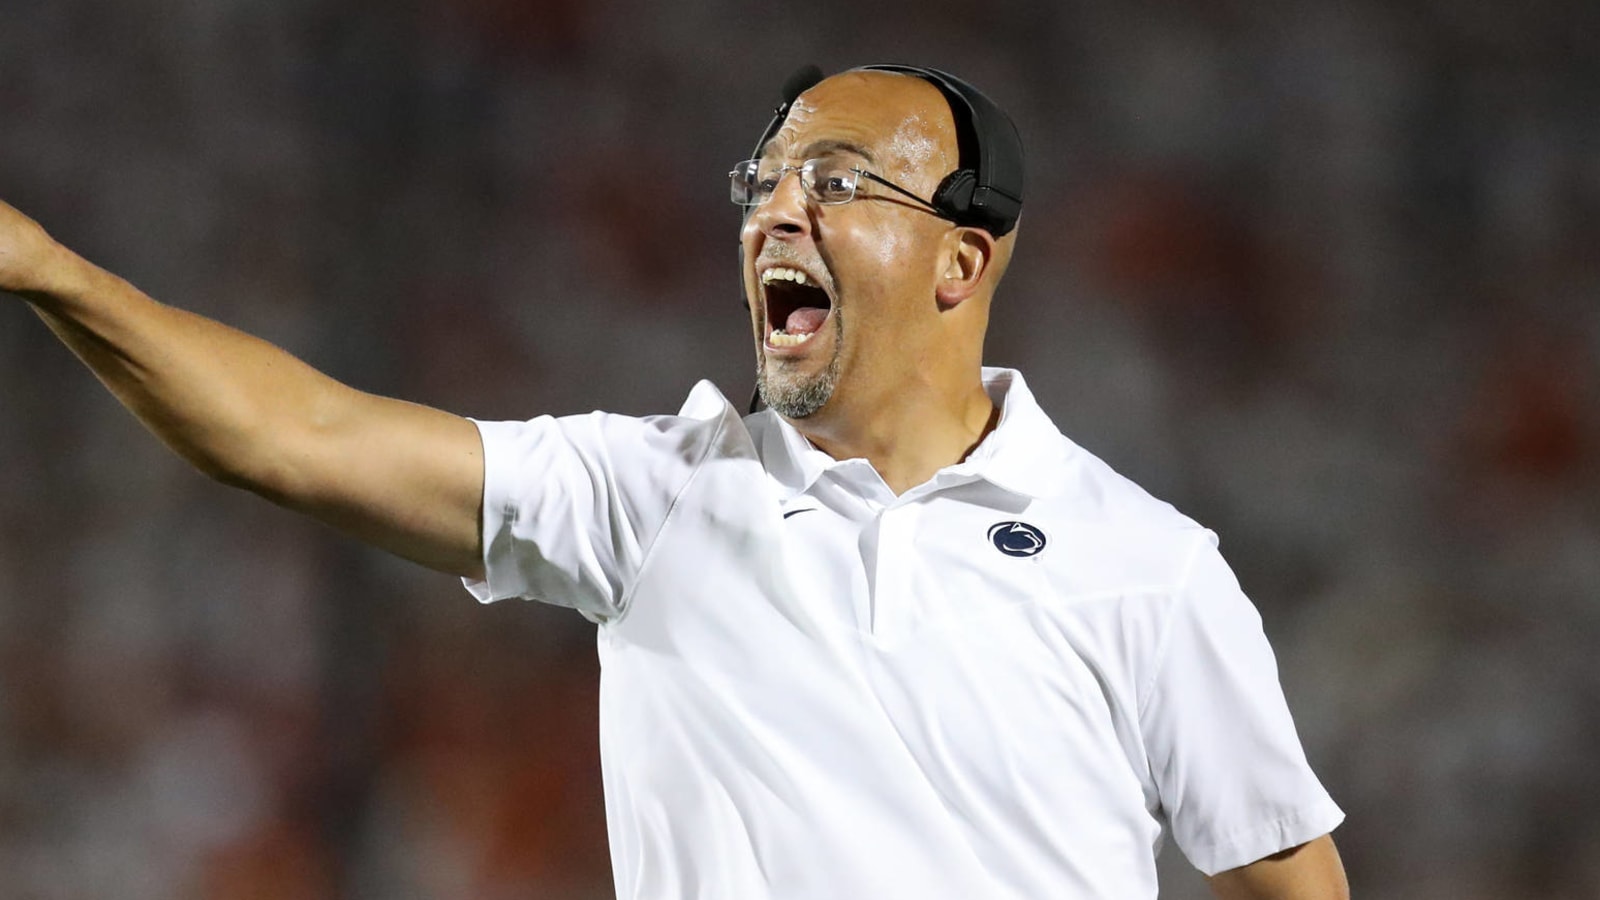 LSU, USC both targeting Penn State's James Franklin for open head coach position?